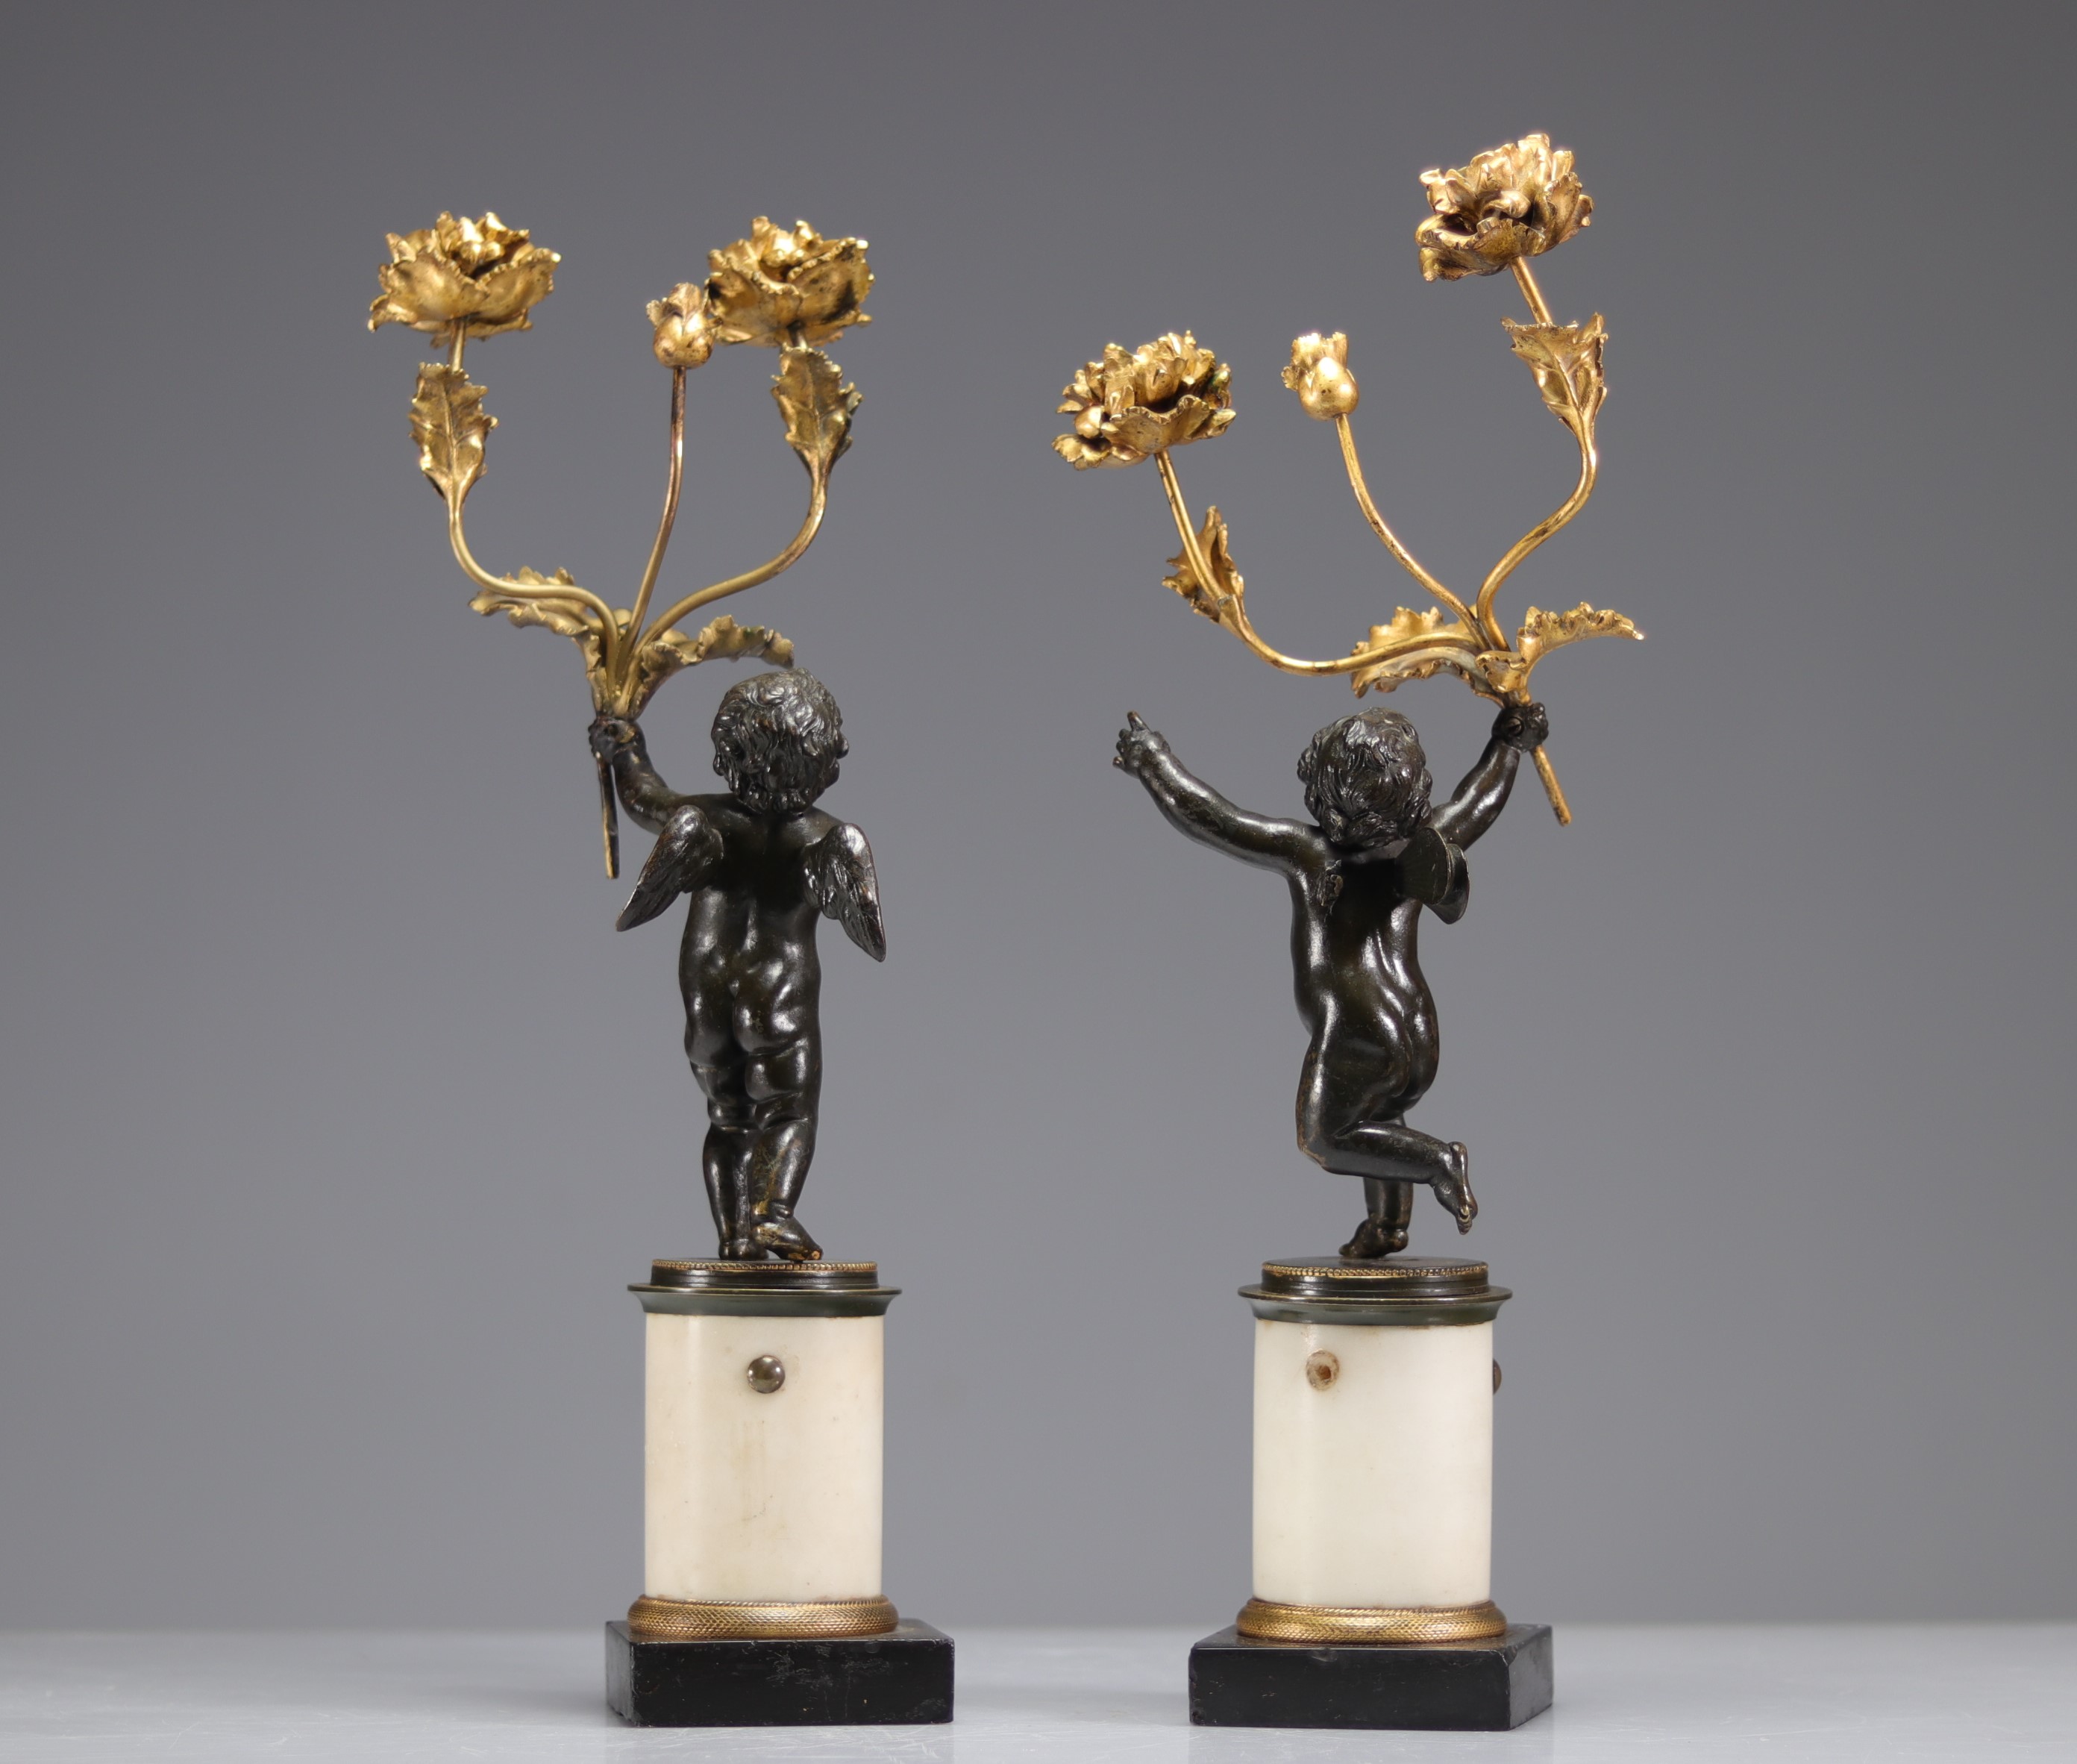 Pair of bronze candlesticks with two Louis XV style patinas - Image 3 of 3